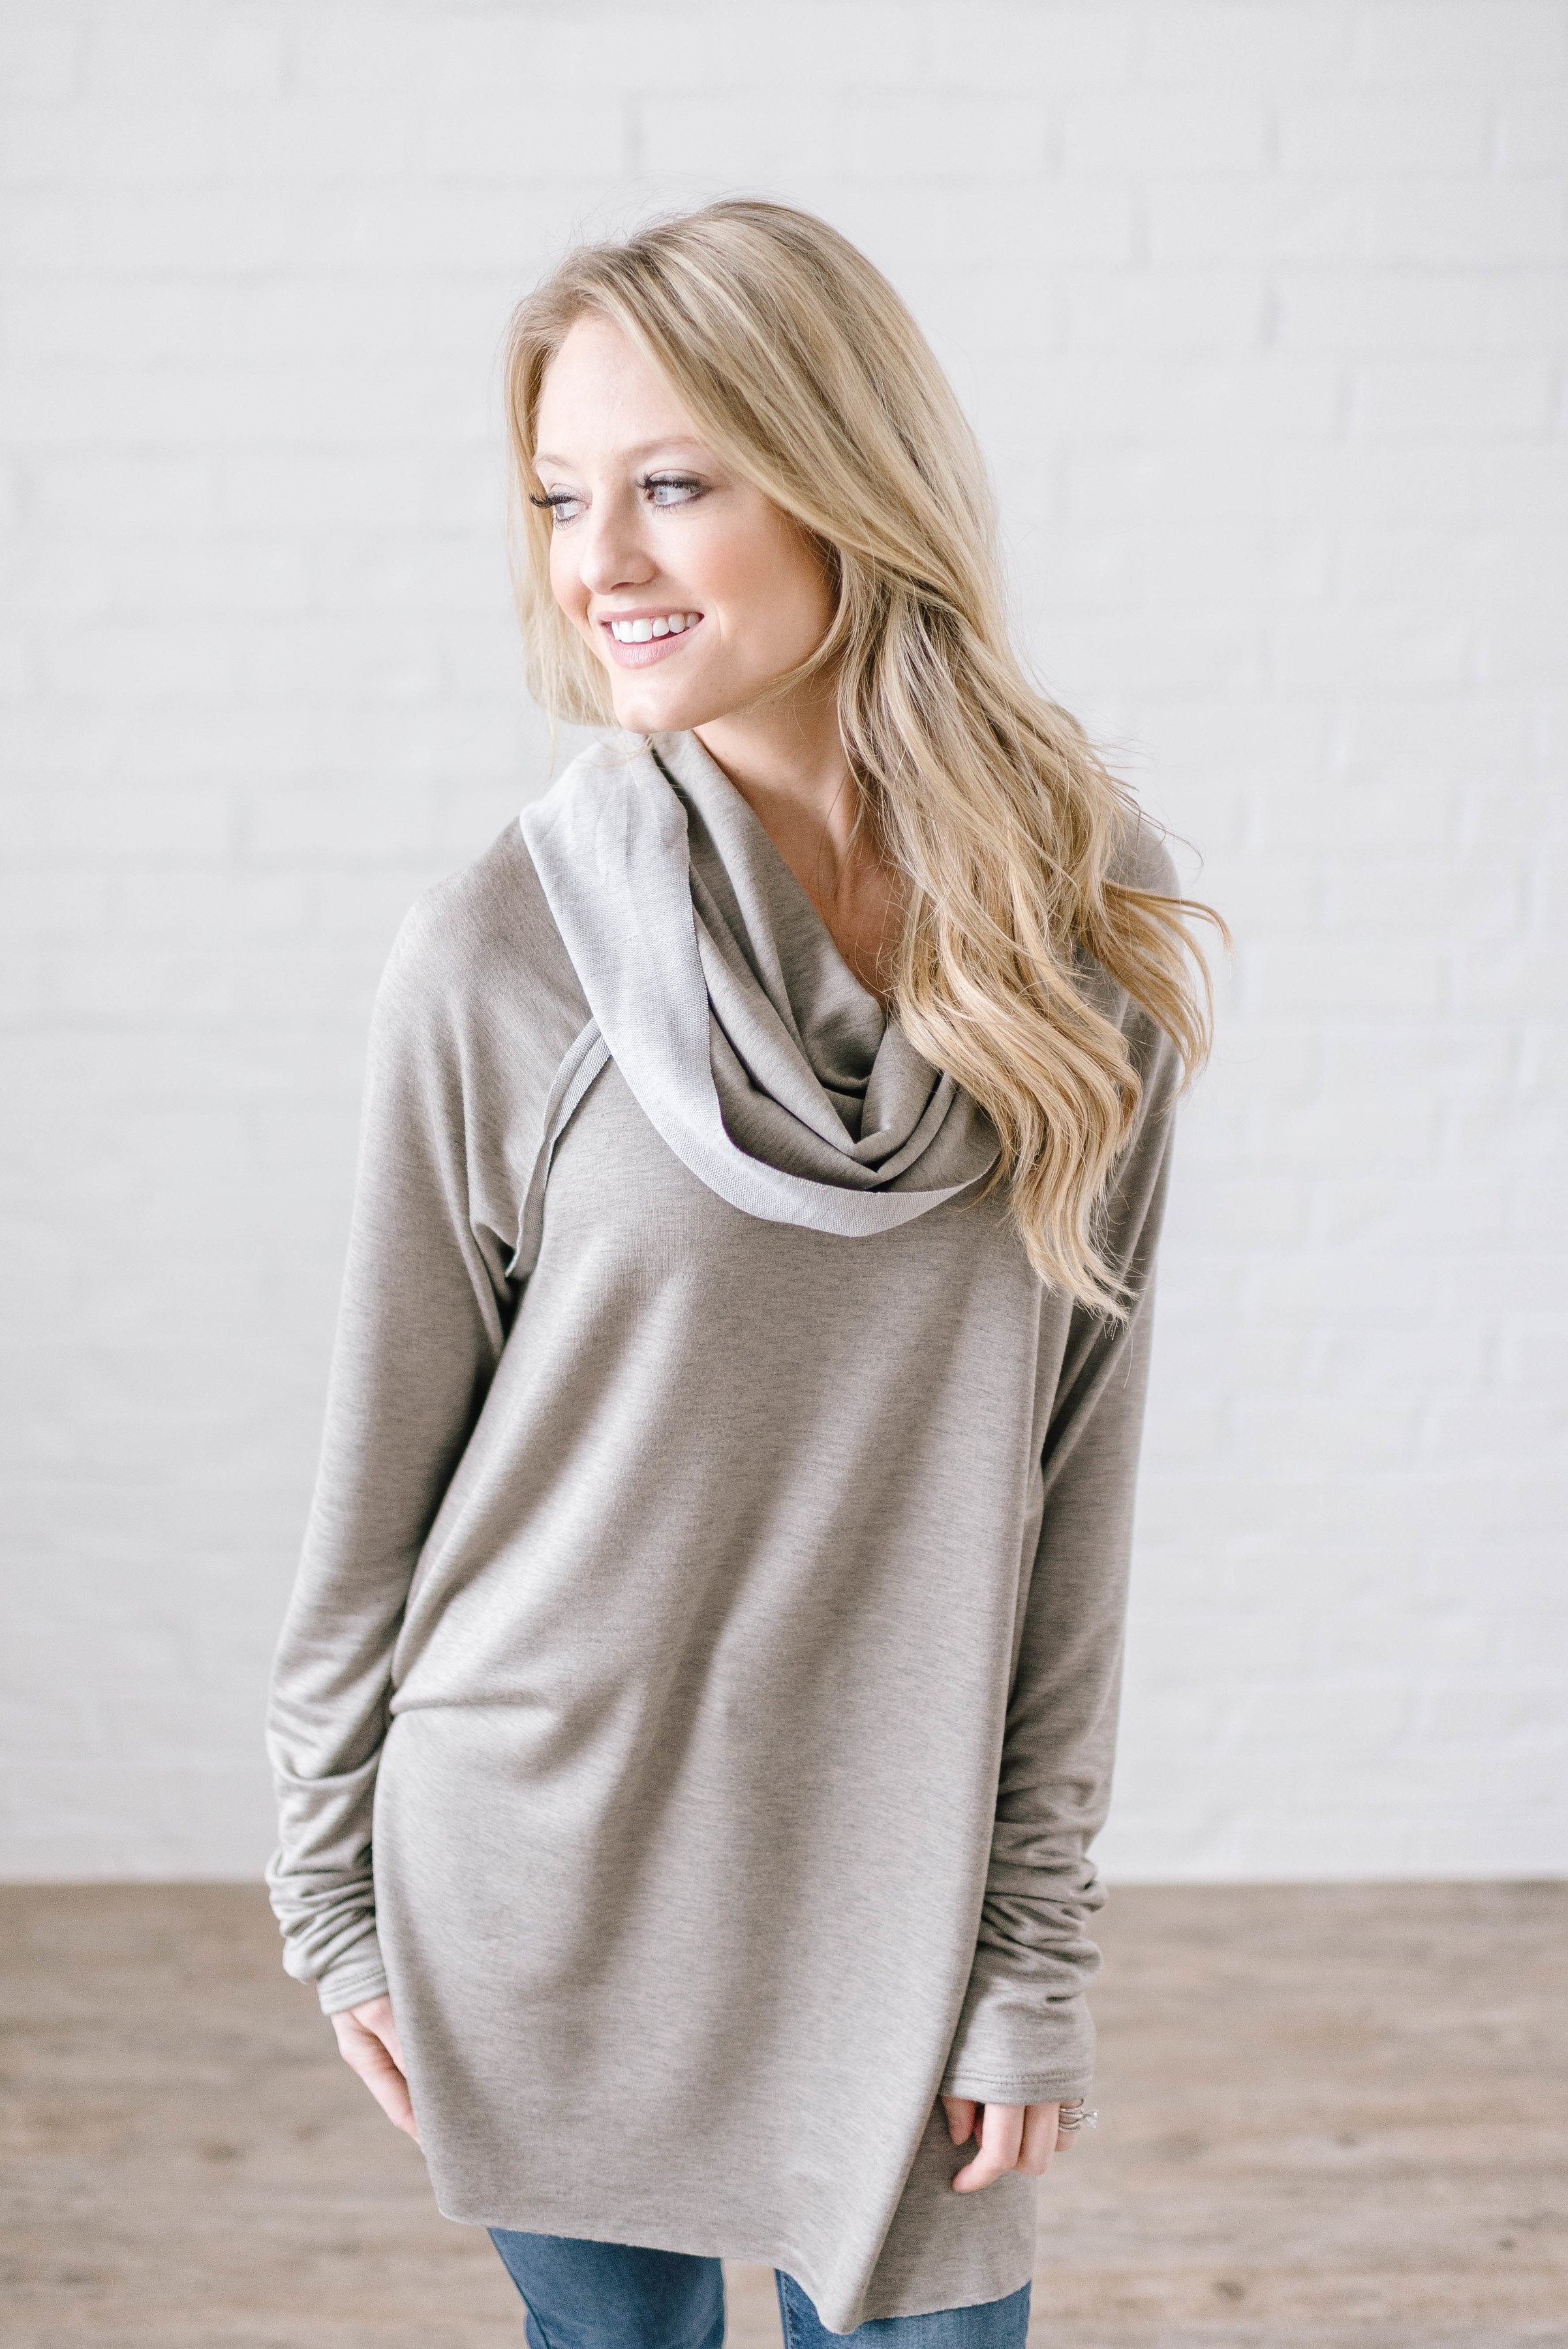 Rainy Day Cowl Neck Tunic in Taupe